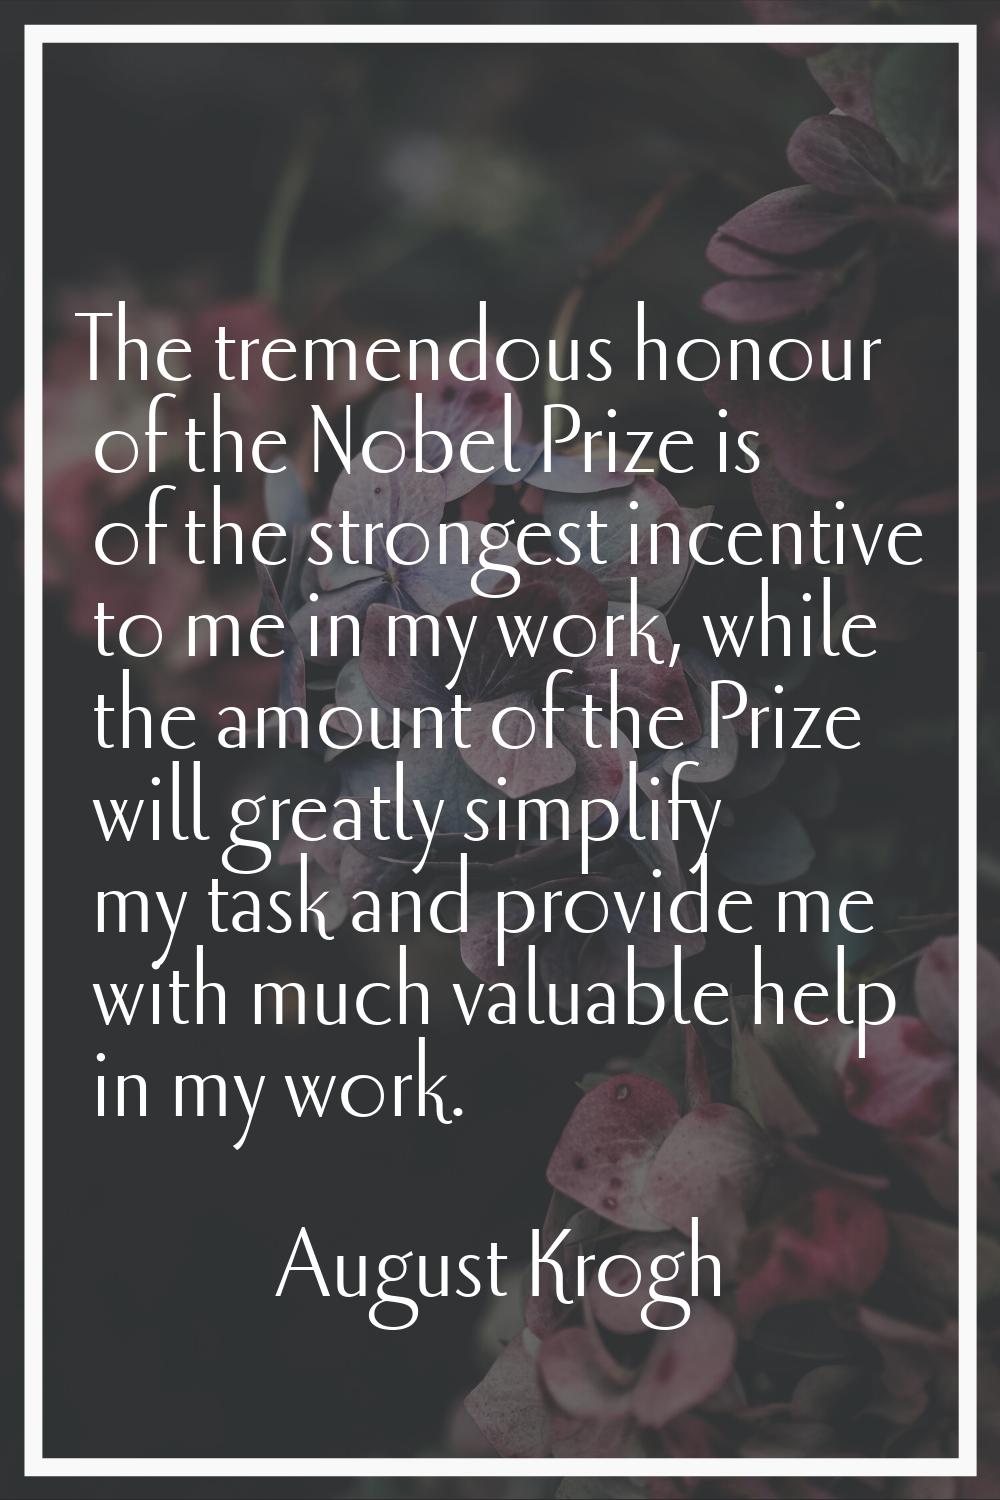 The tremendous honour of the Nobel Prize is of the strongest incentive to me in my work, while the 